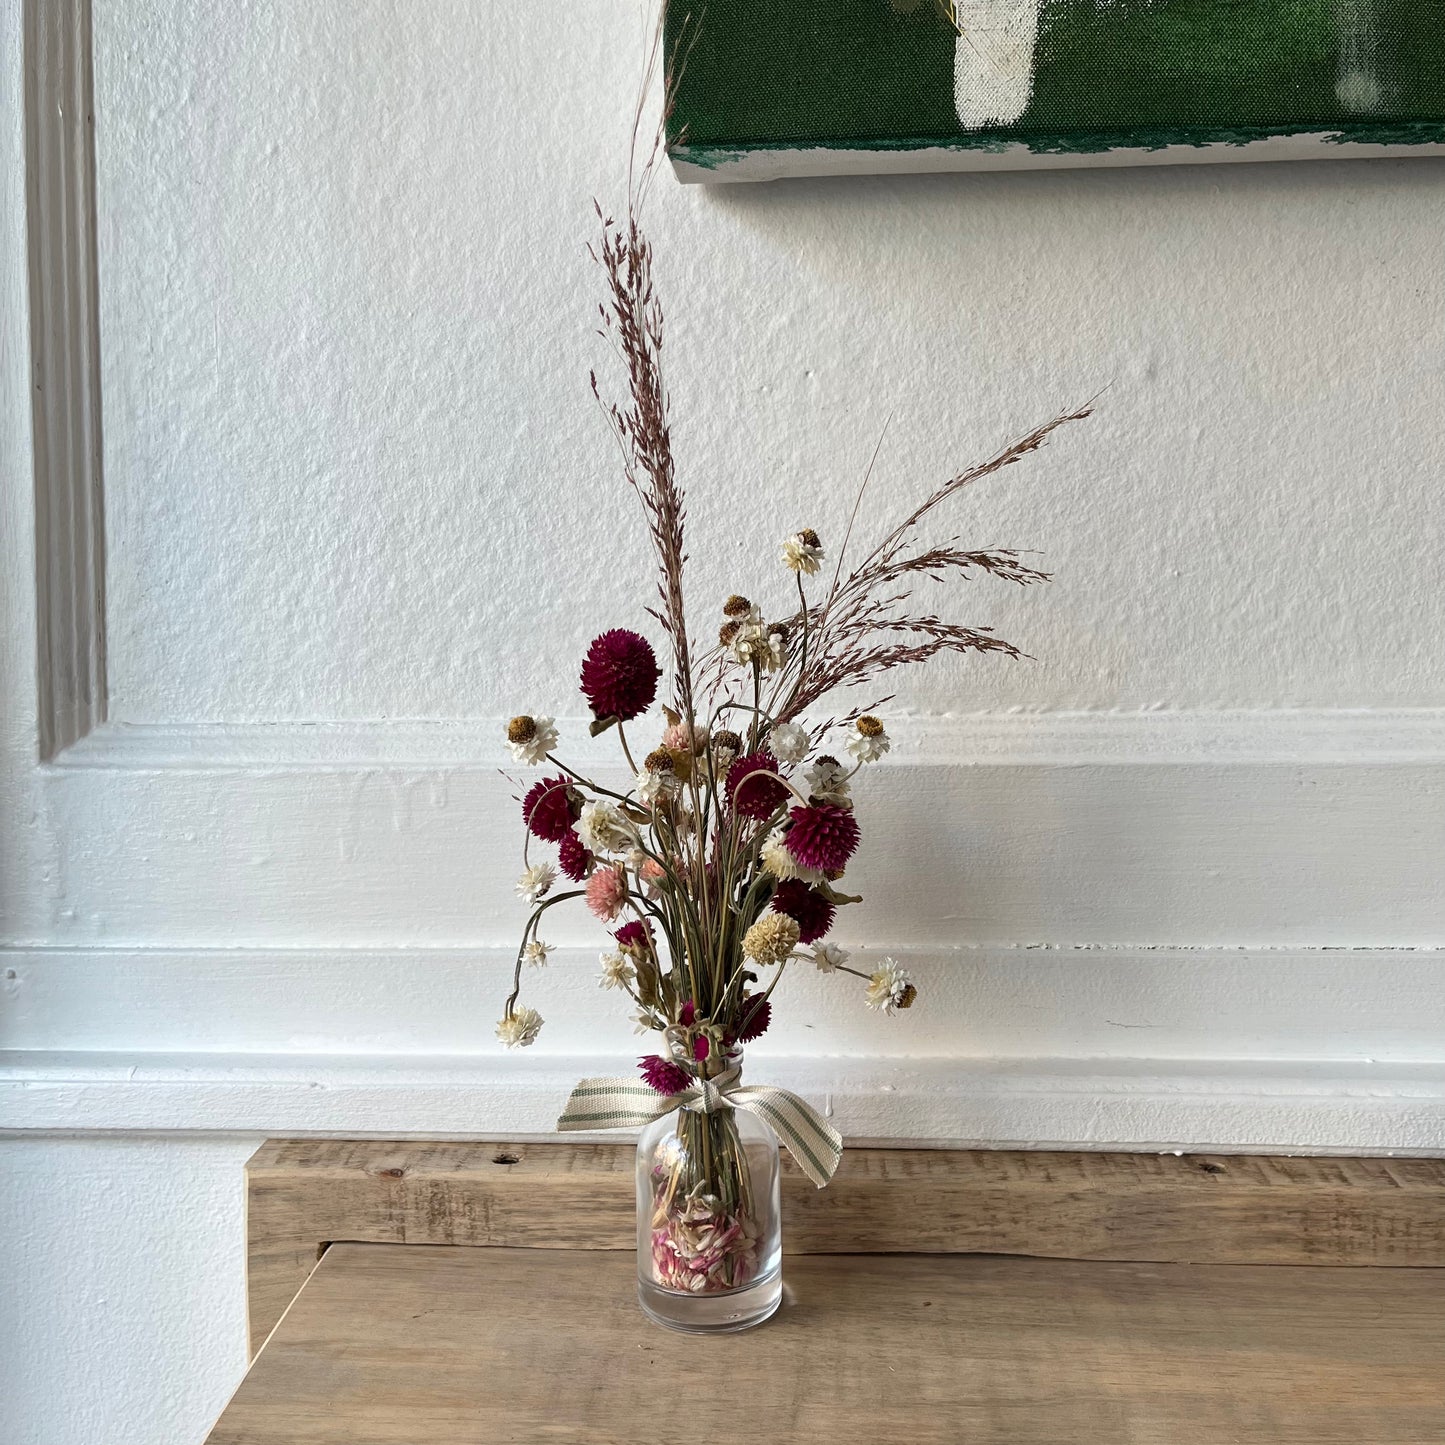 Locally dried flowers in a glass bud vase tied off with a striped cotton ribbon.  Approximate Flower Height: 9 inch; Glass Width: 2 inch